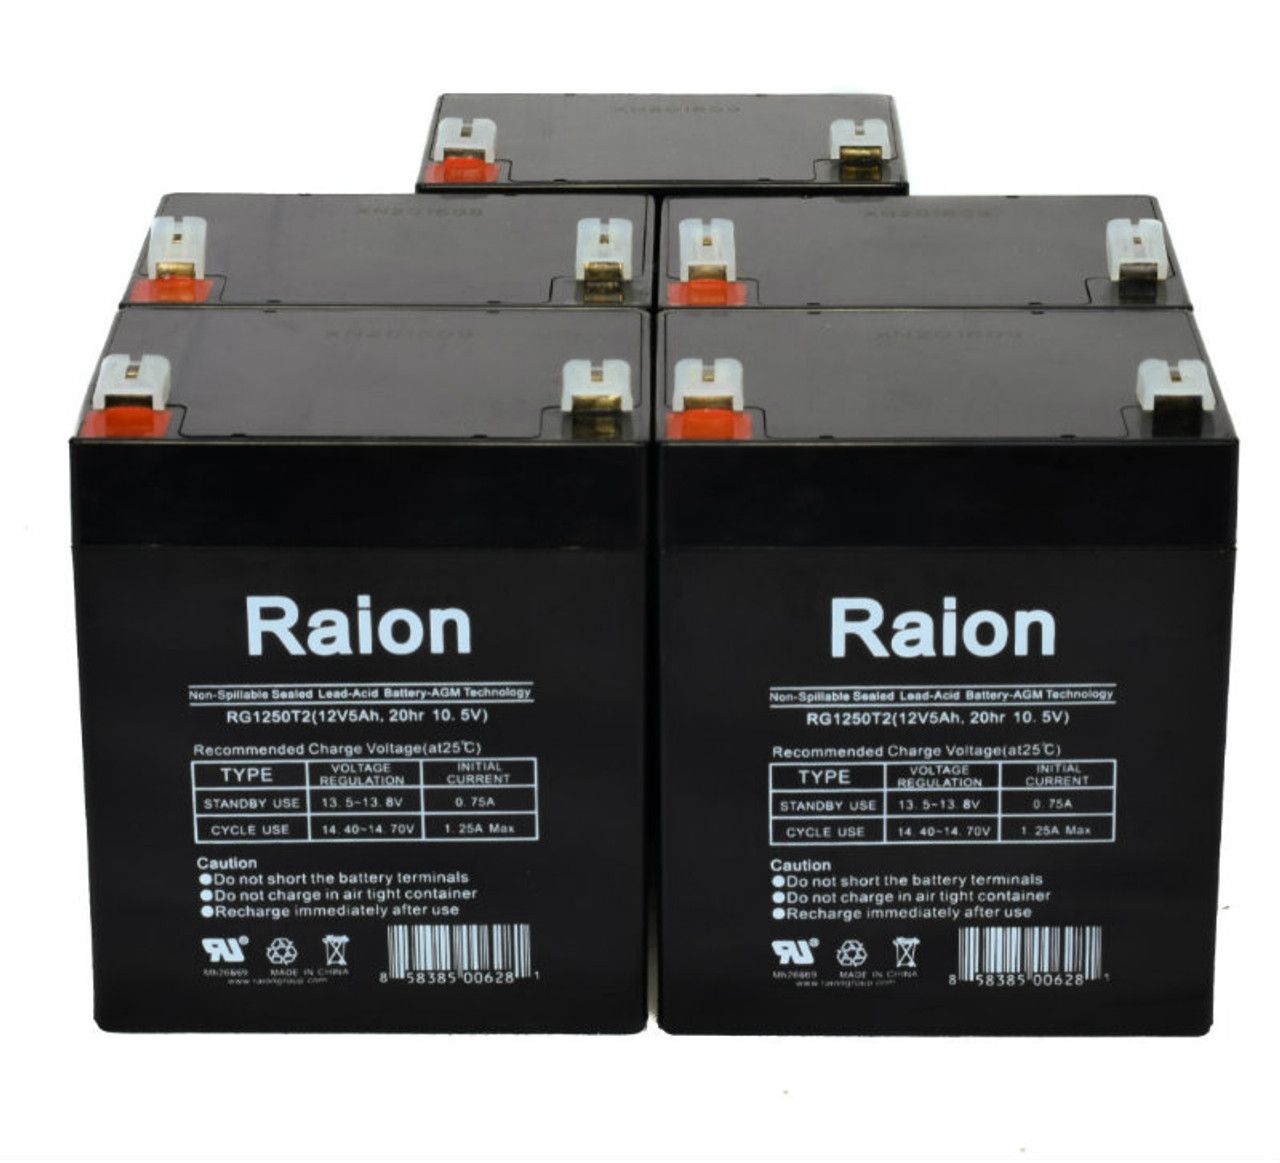 Raion Power RG1250T1 Replacement Fire Alarm Control Panel Battery for Securitron 12VOLT 4AMP - 8 Pack